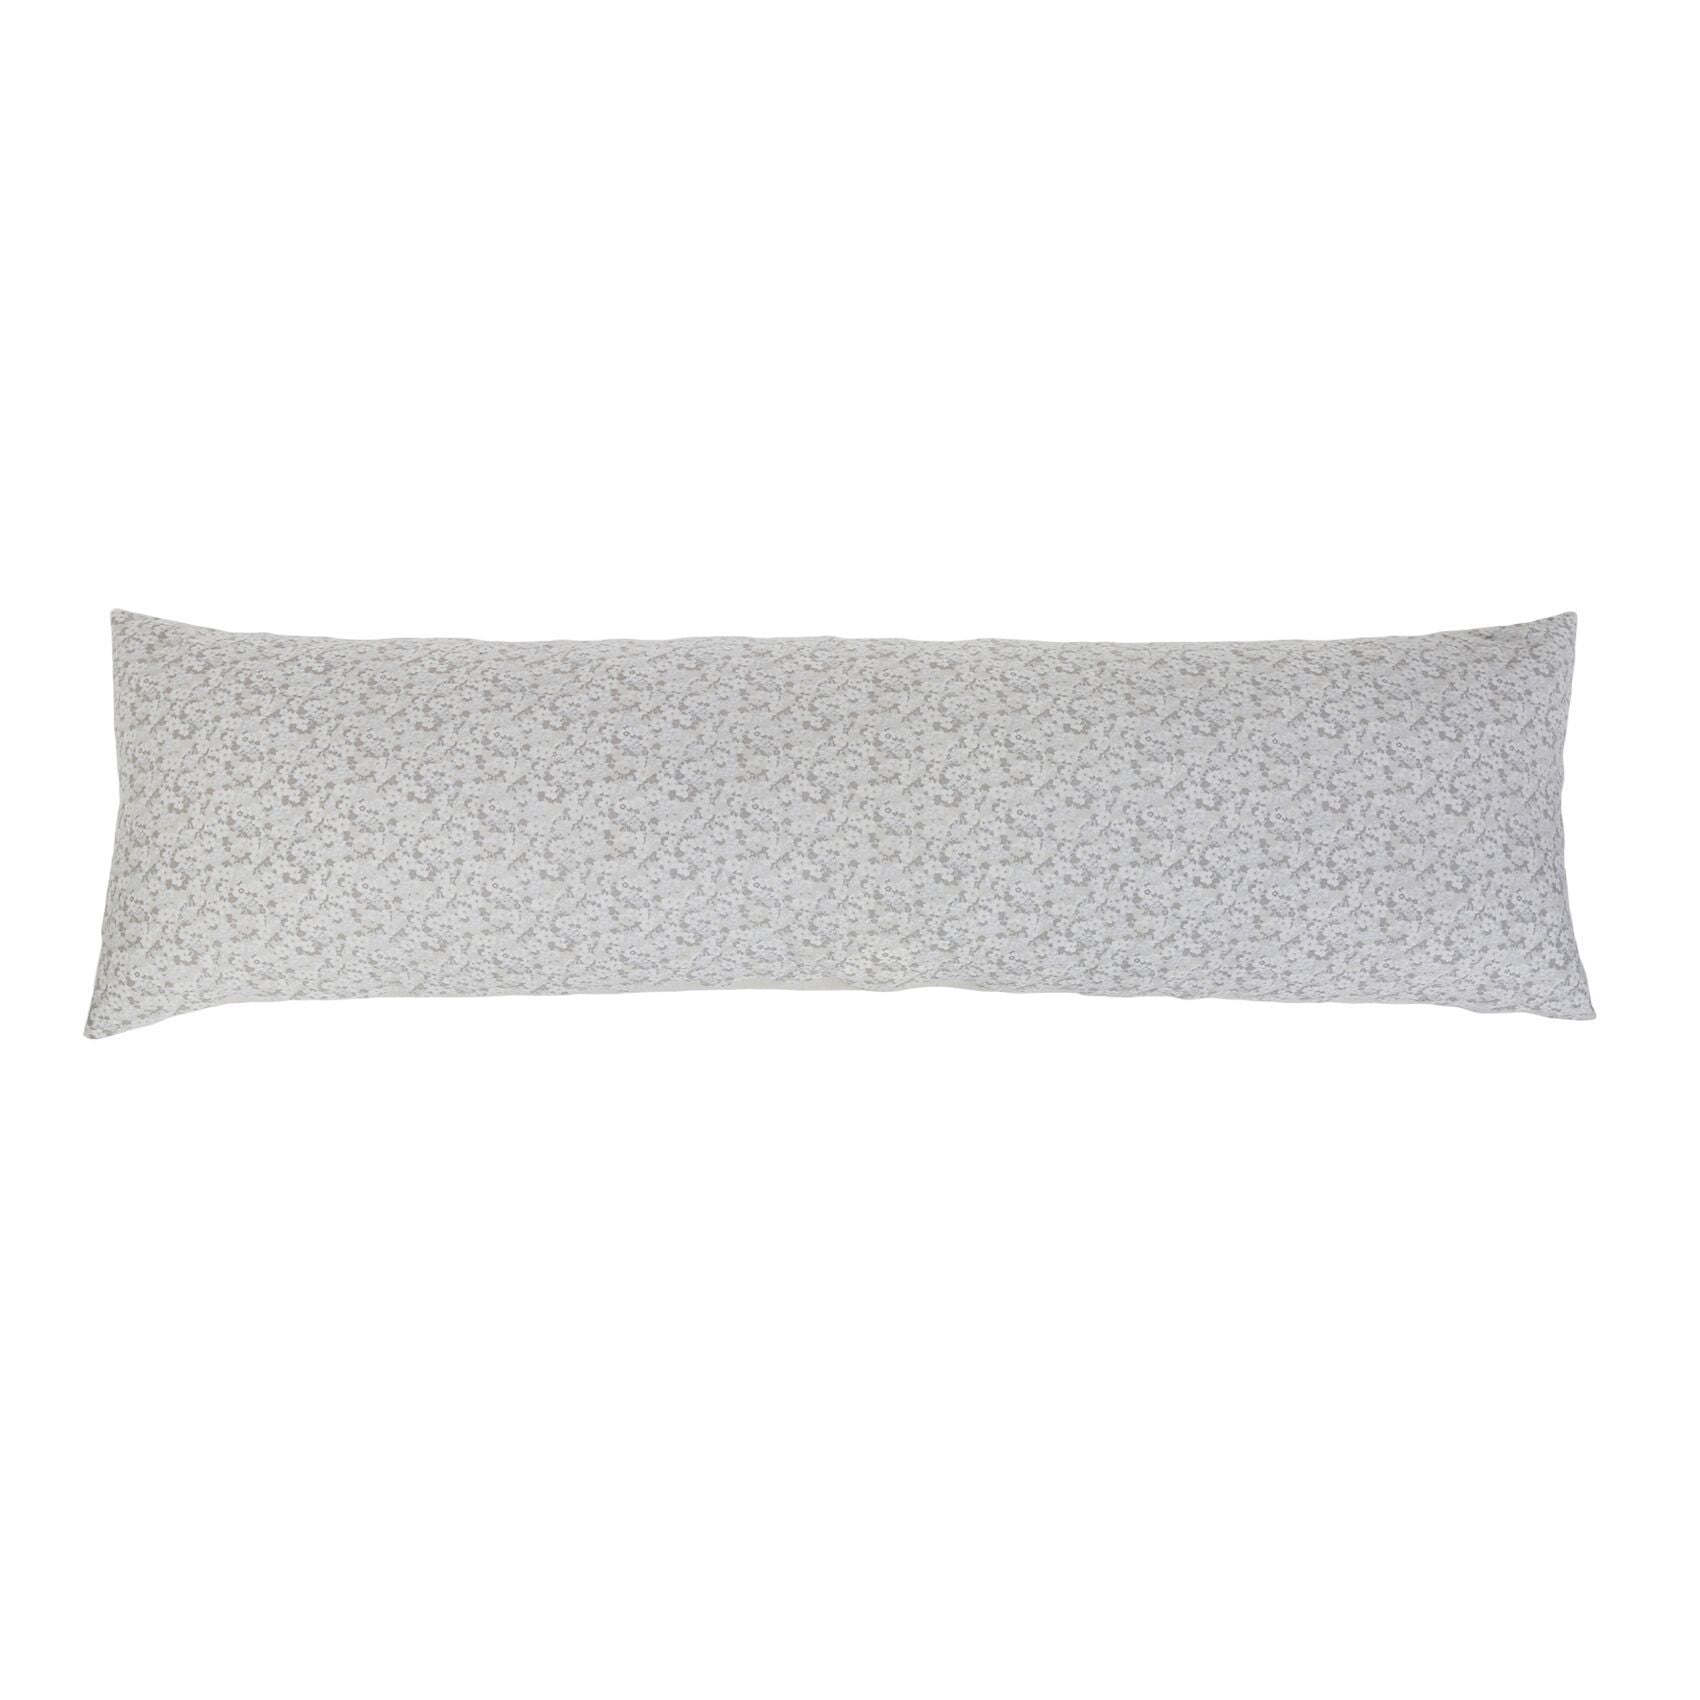 June Body Pillow by Pom Pom at Home | Fig Linens and Home